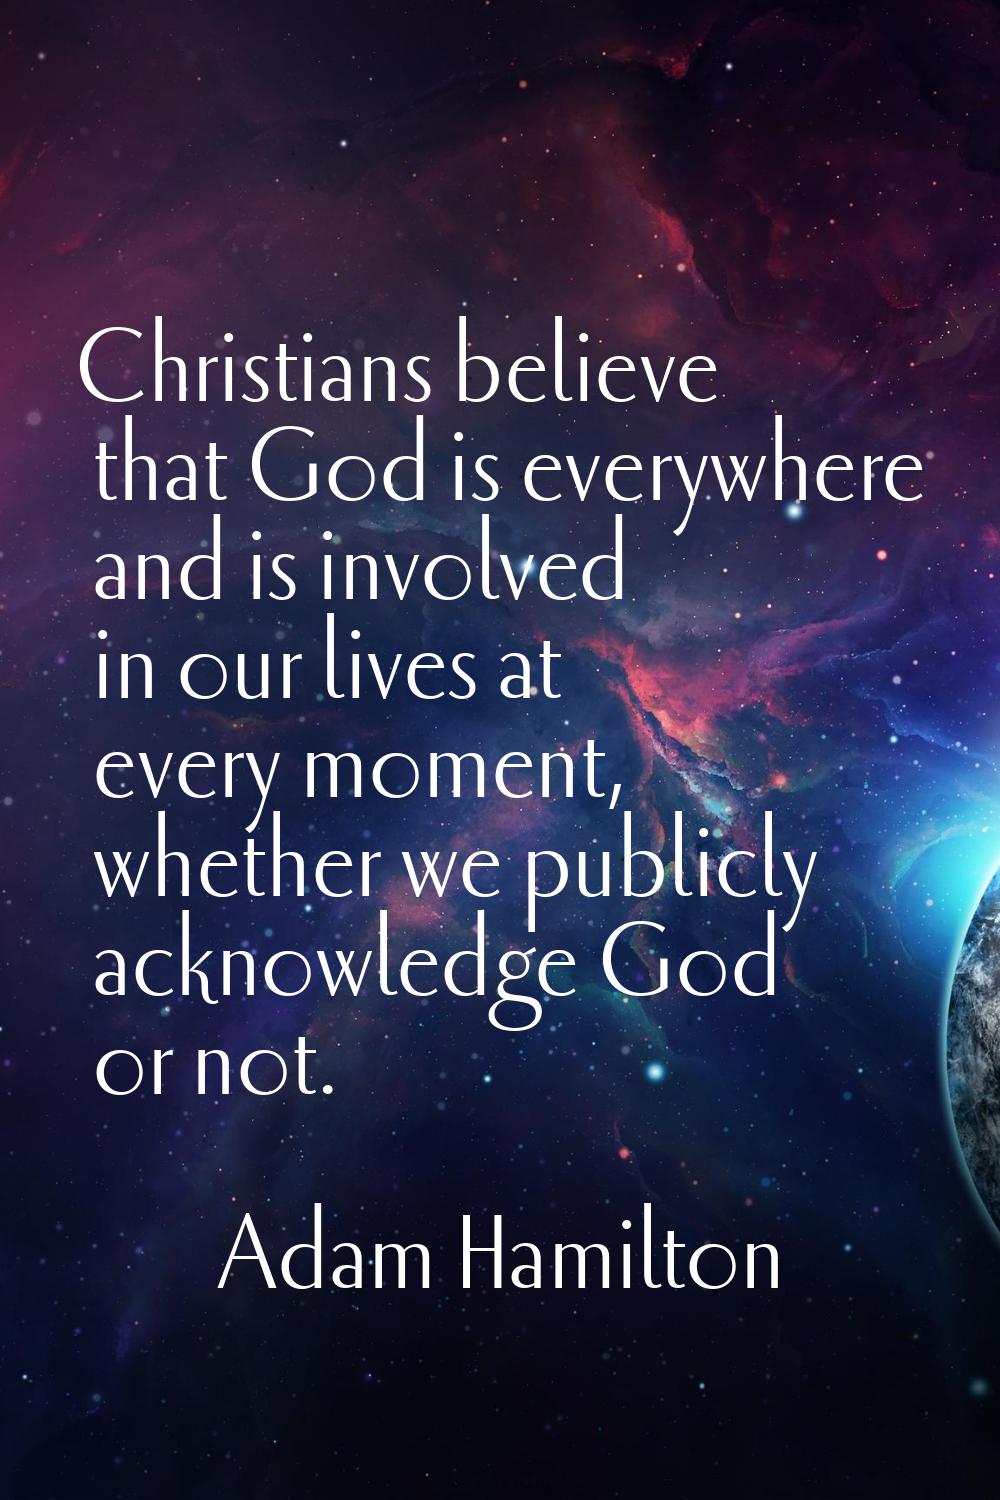 Christians believe that God is everywhere and is involved in our lives at every moment, whether we 